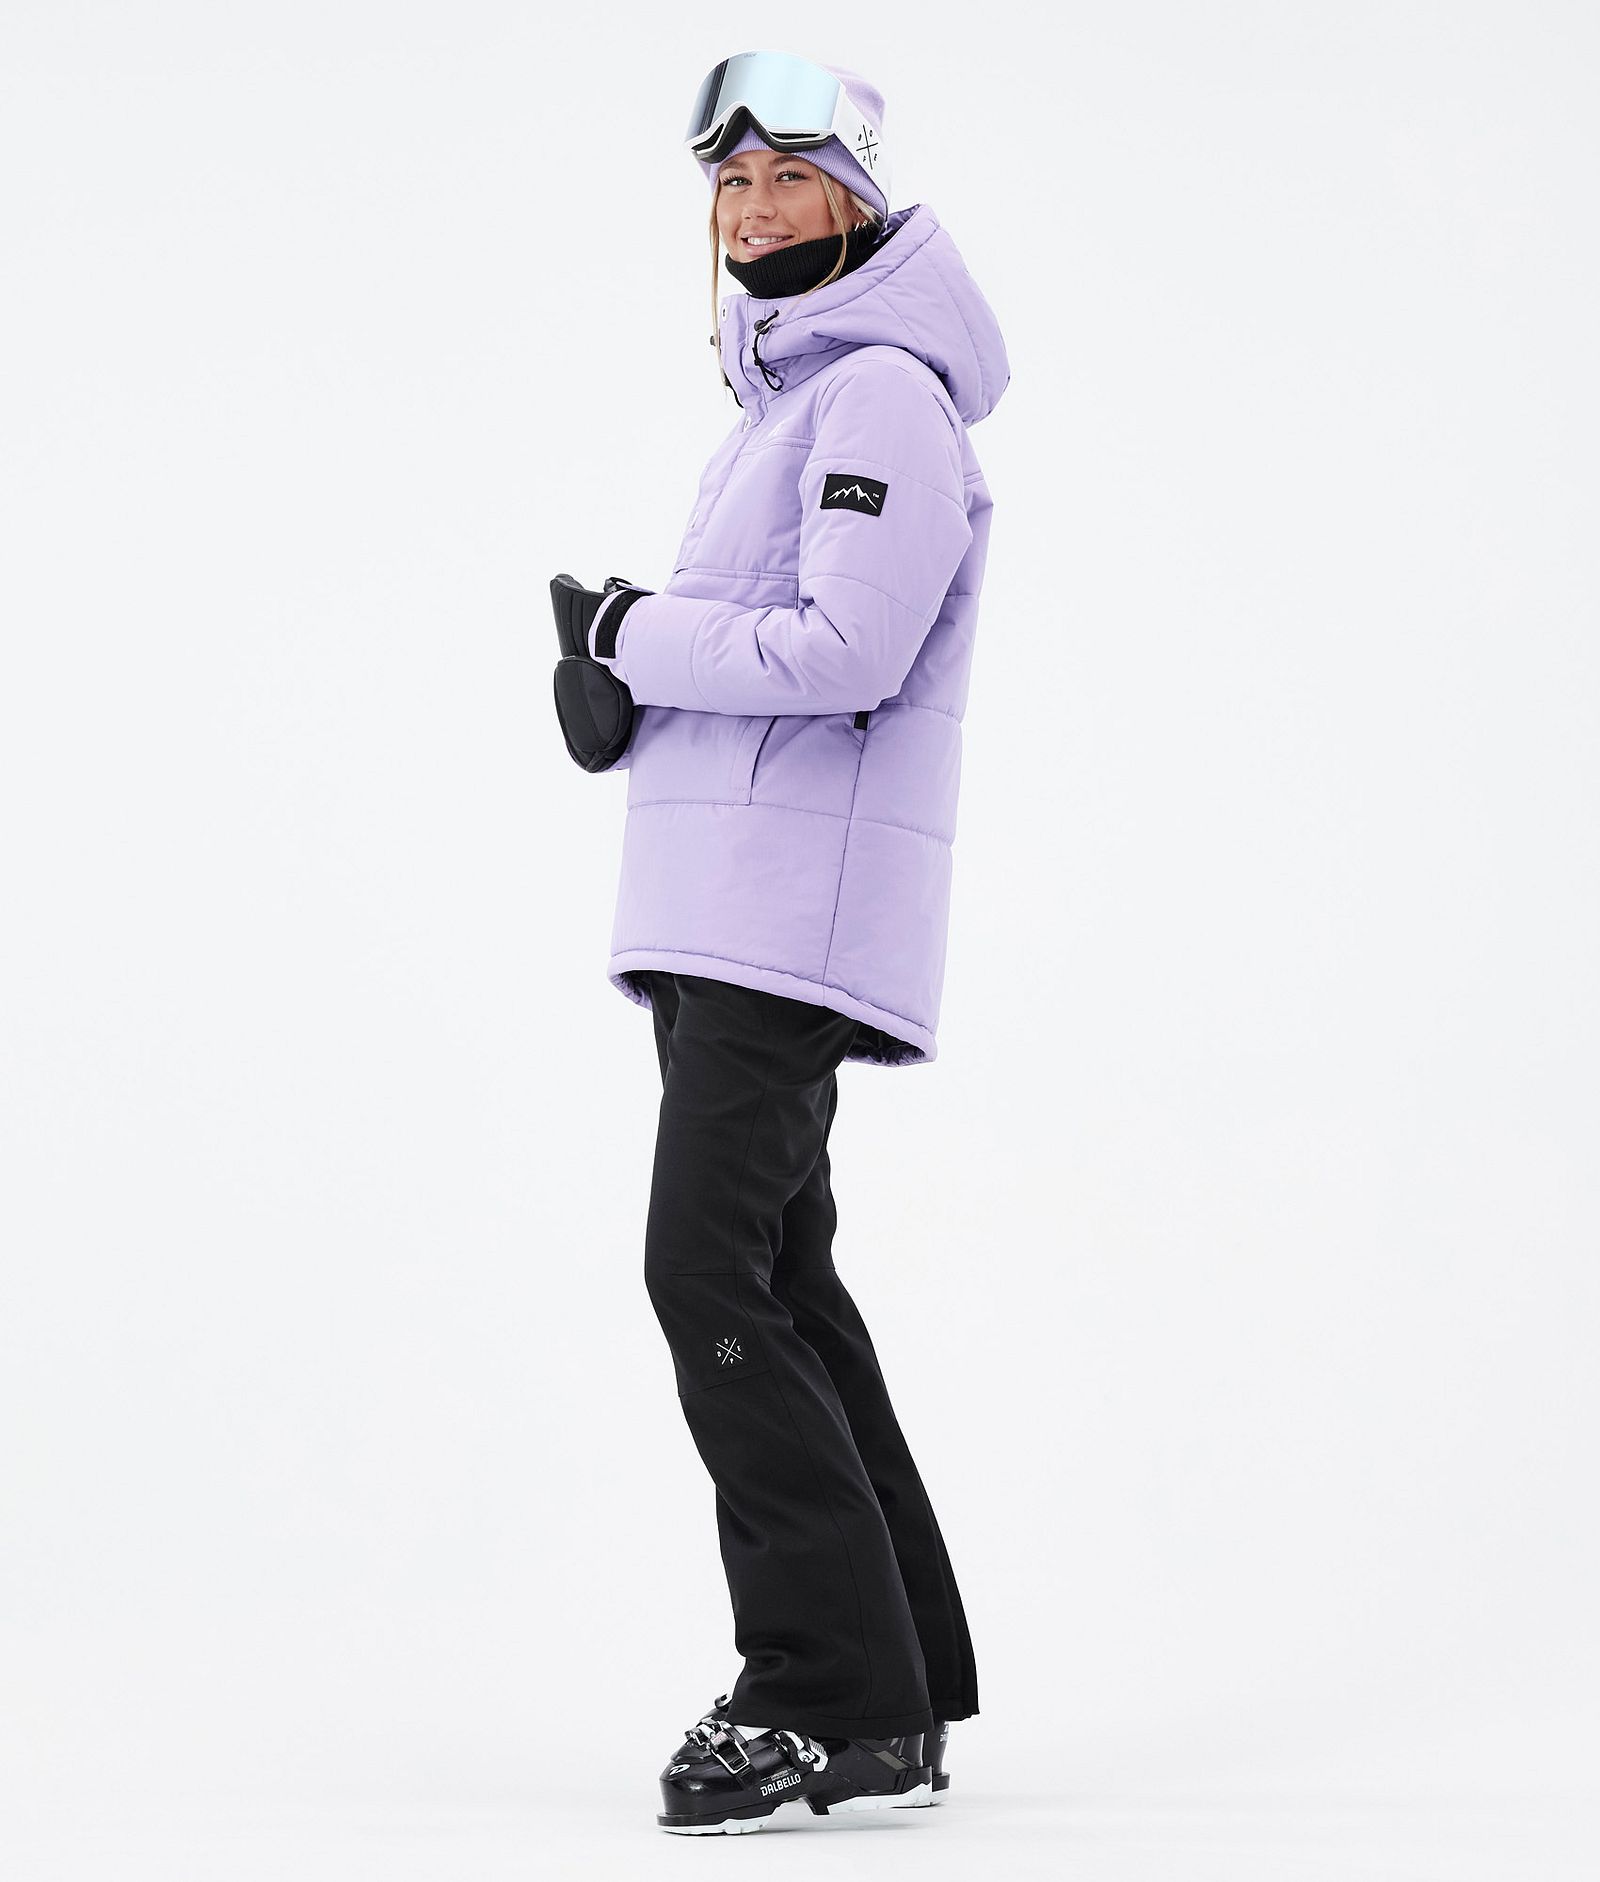 Missguided, Jackets & Coats, Missguided Ski Suit